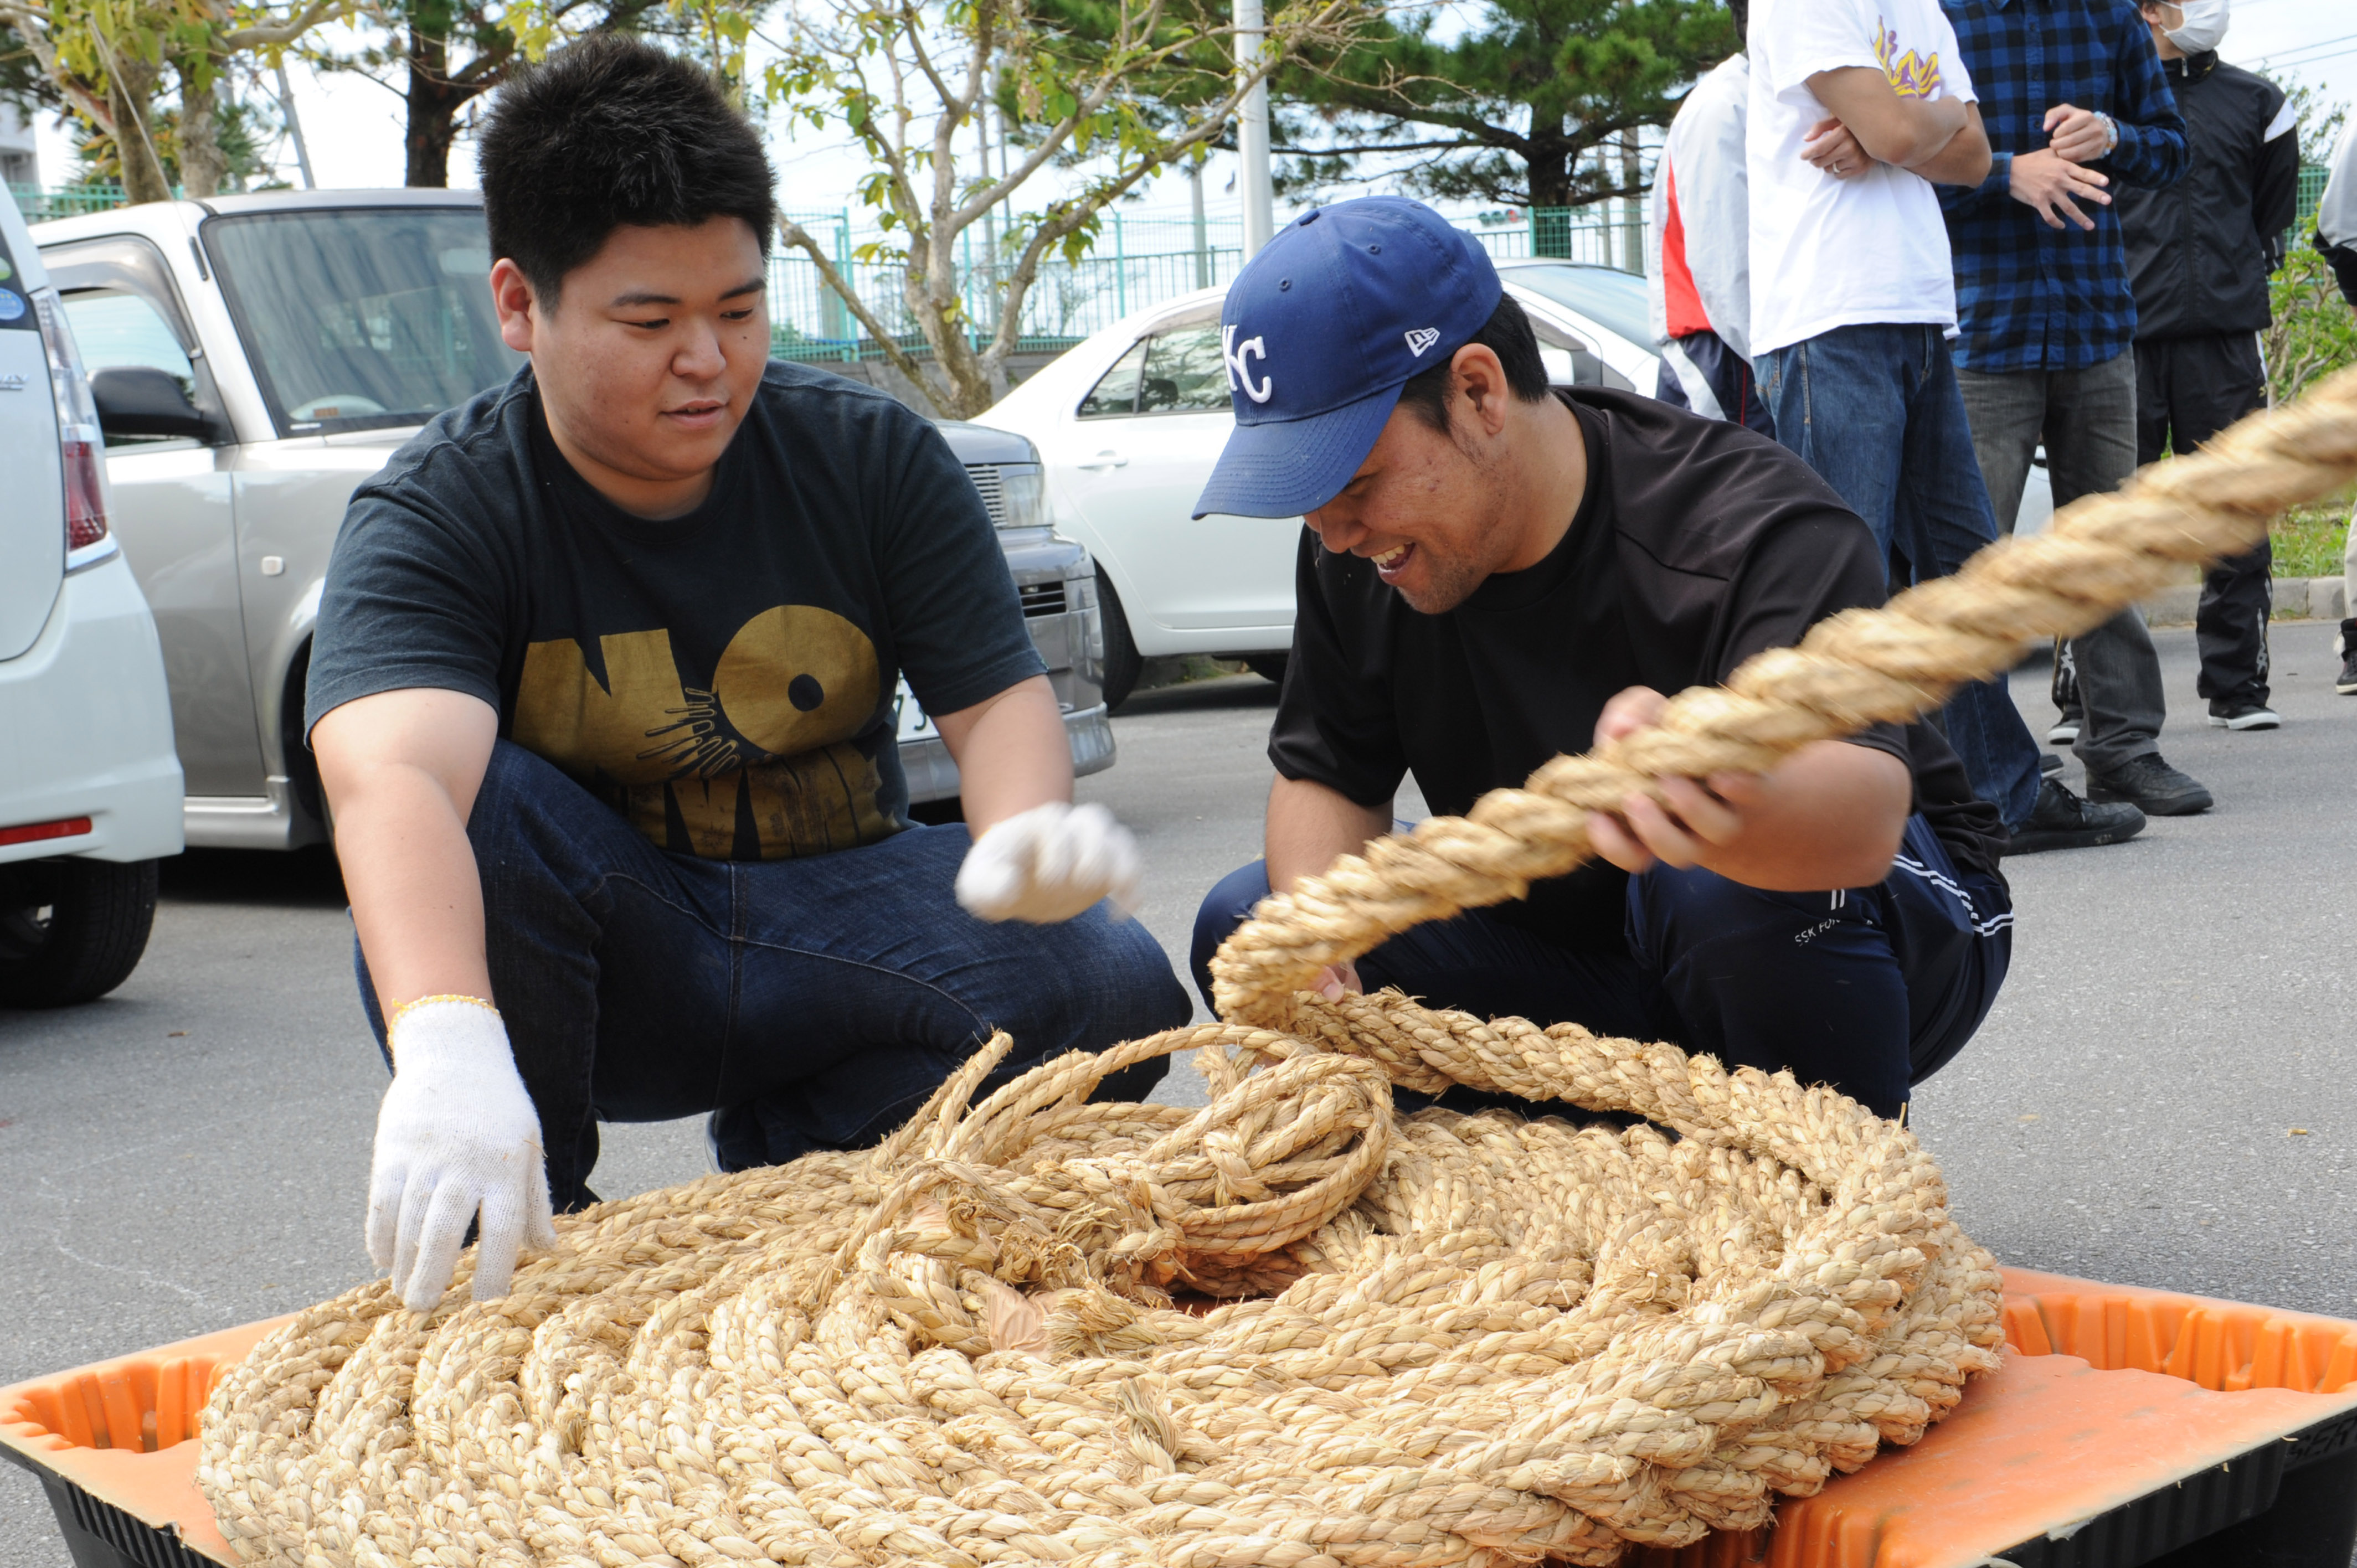 Tug-of-War ropes in community, service members